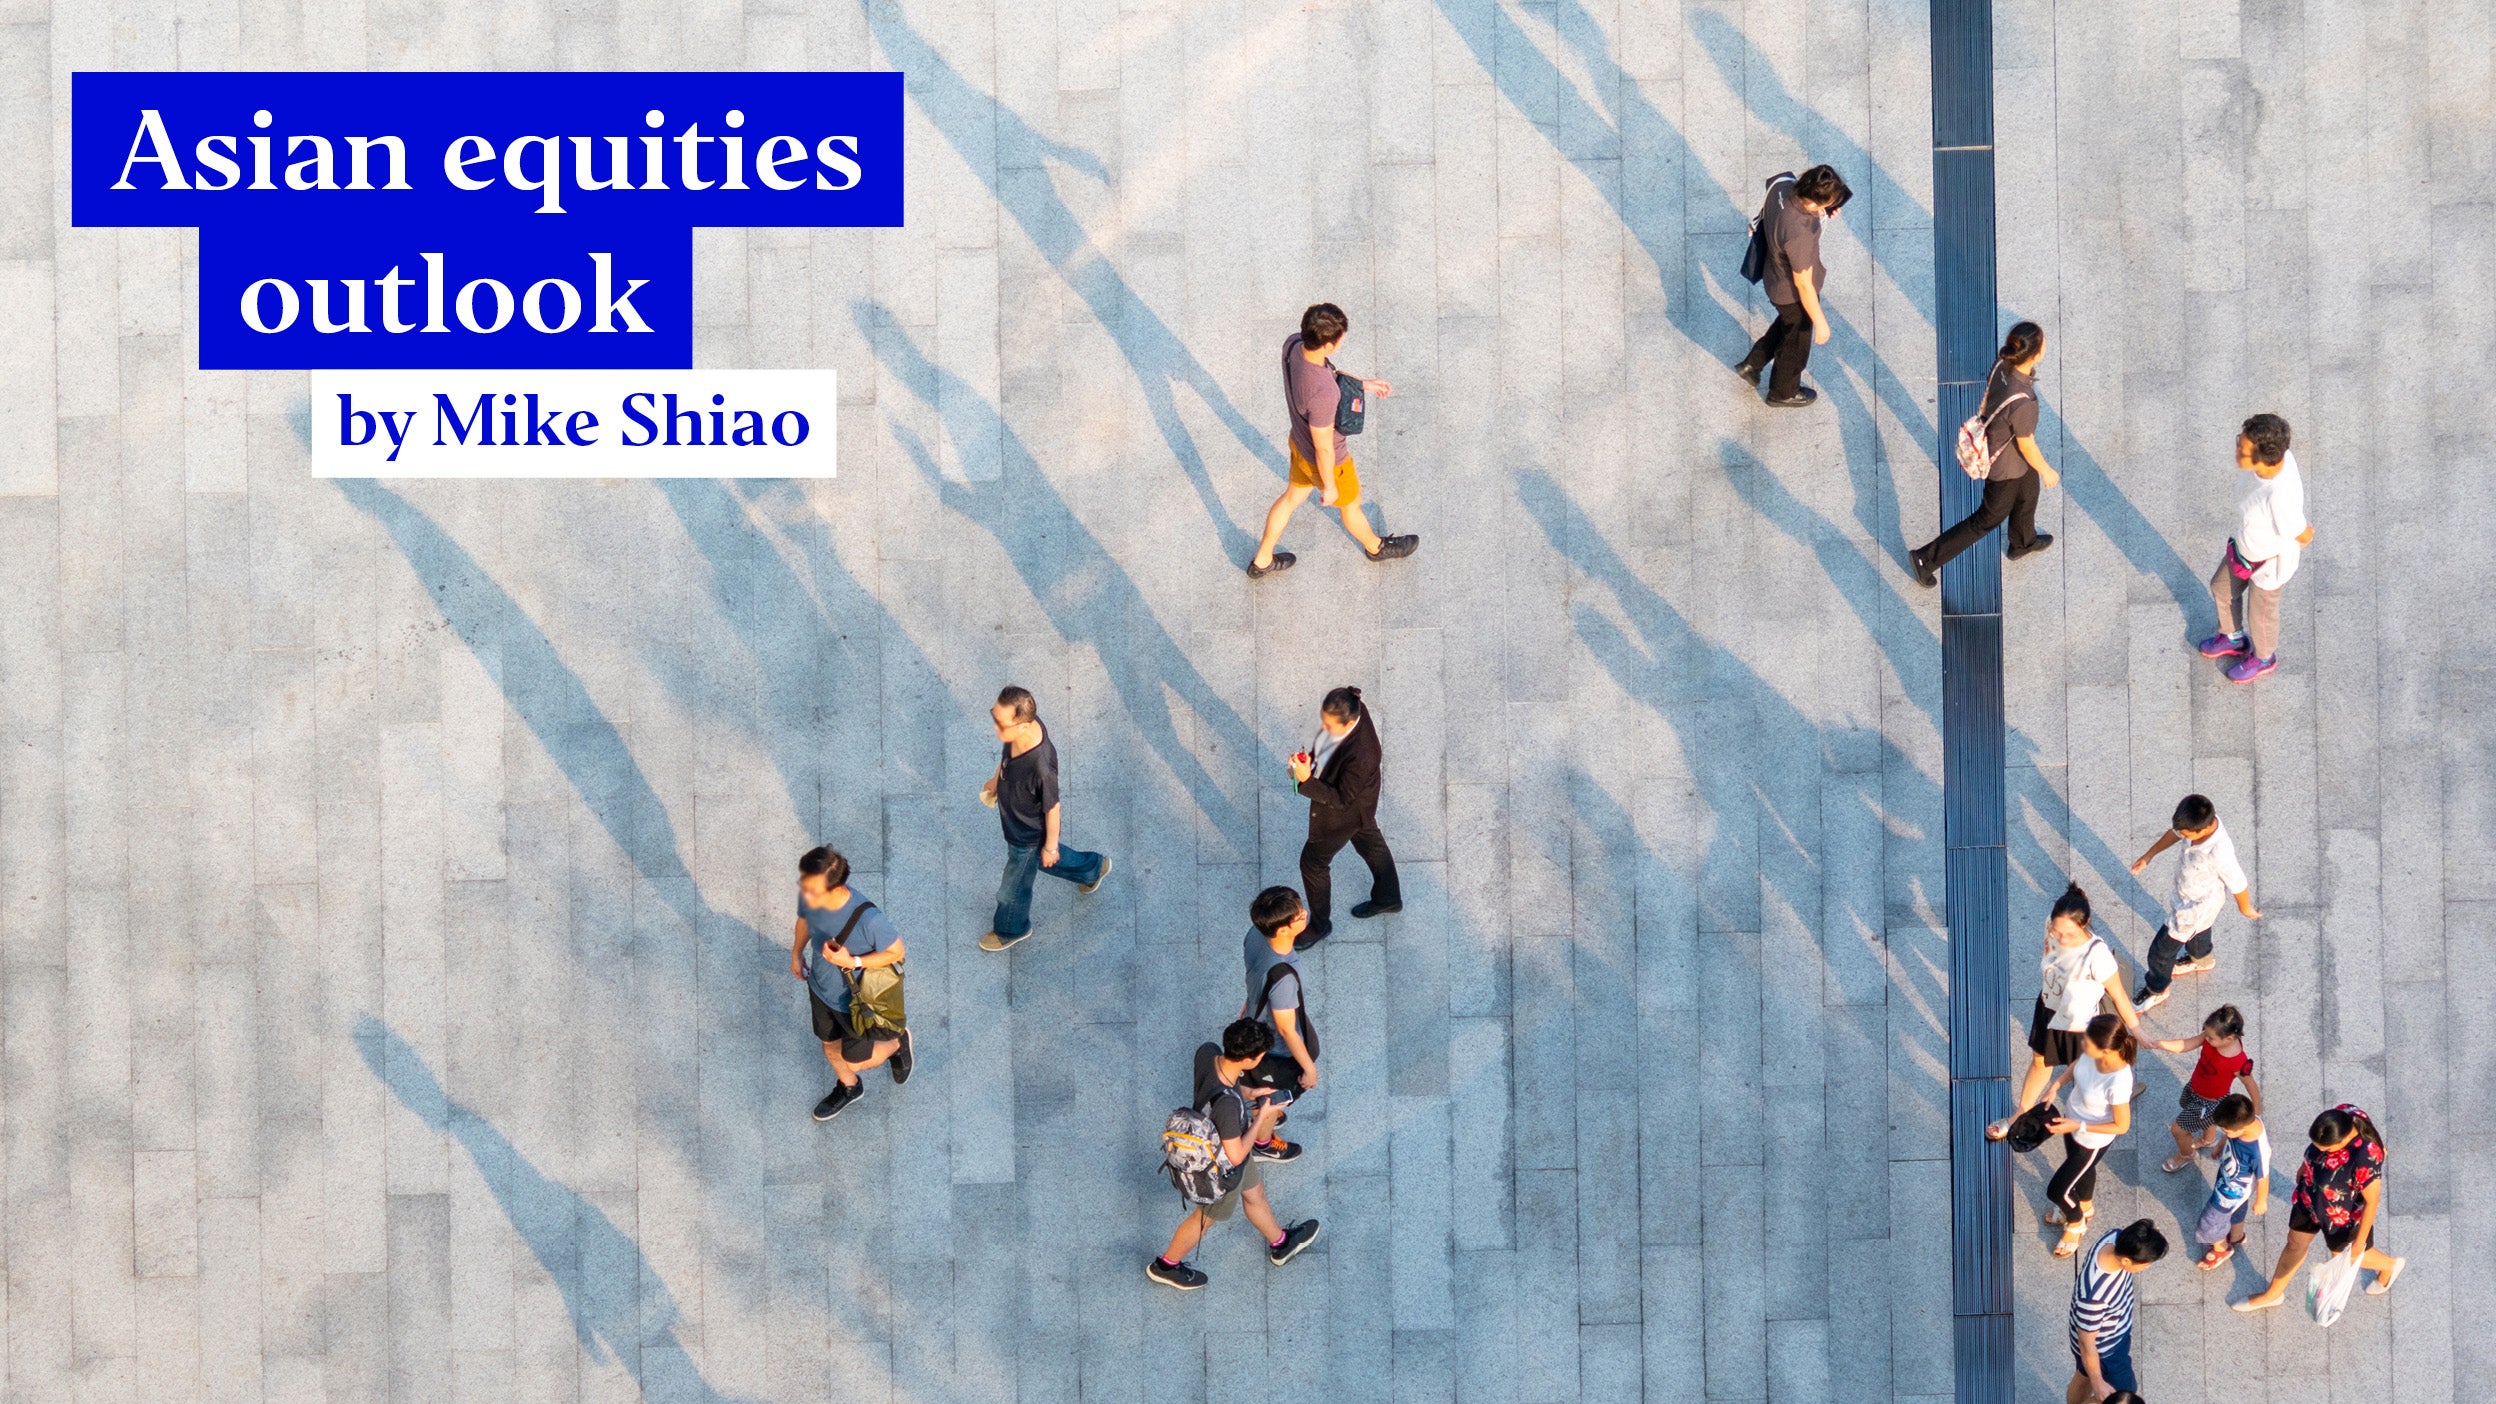 Chinese equities outlook